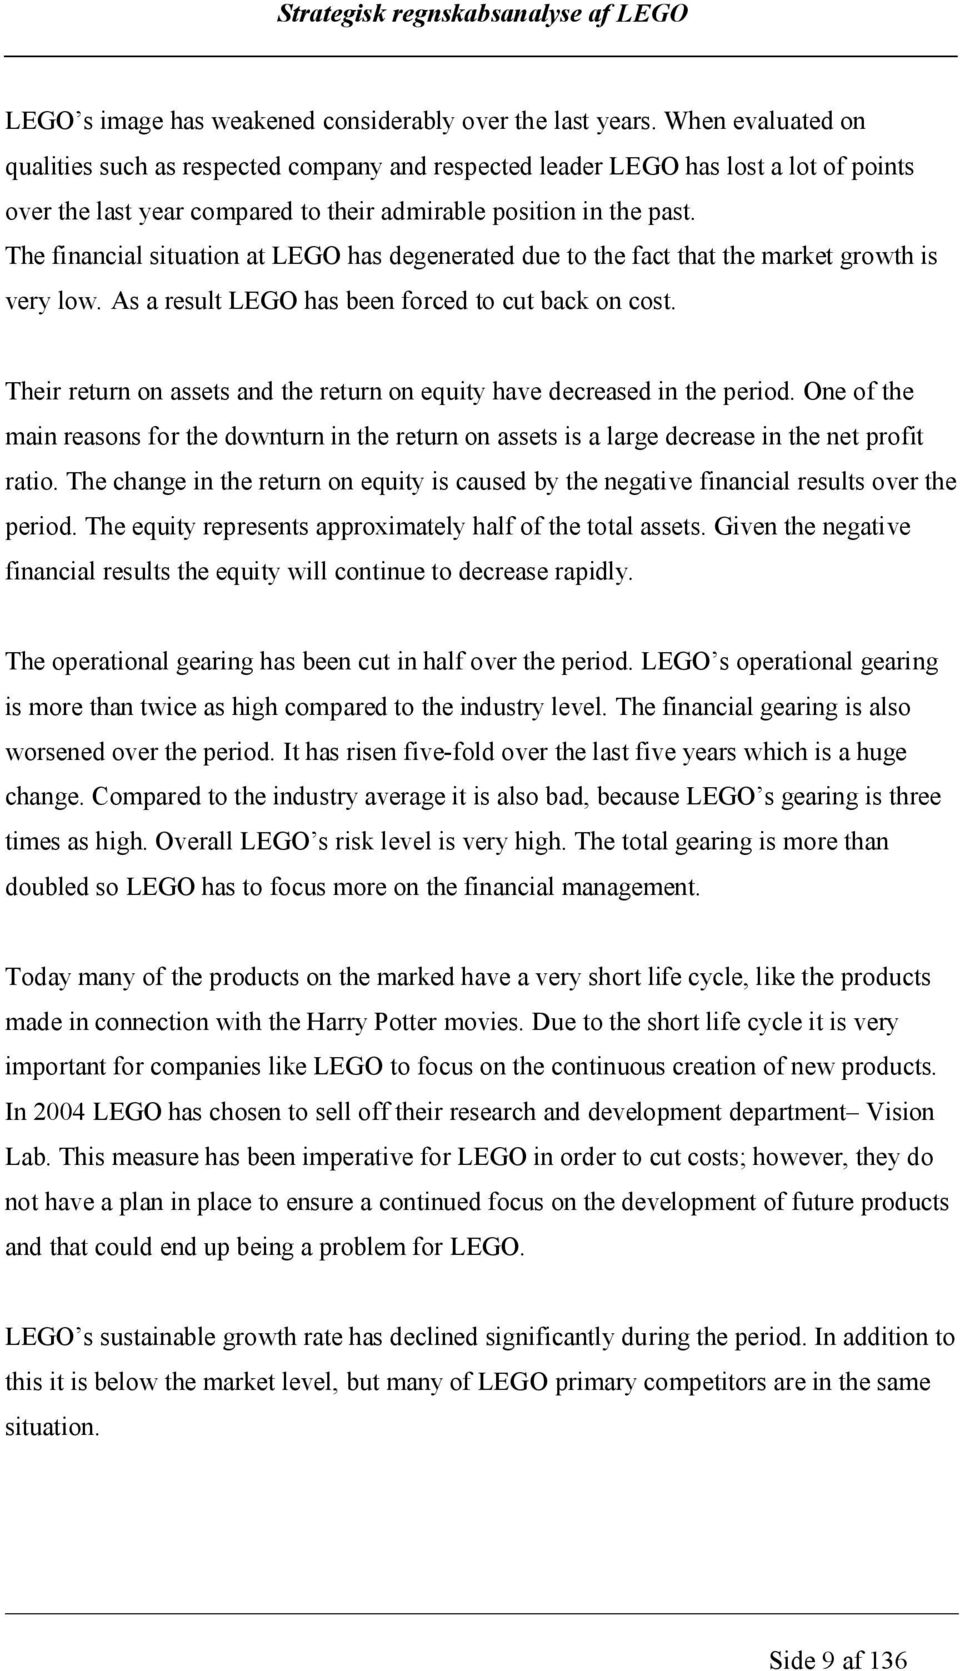 The financial situation at LEGO has degenerated due to the fact that the market growth is very low. As a result LEGO has been forced to cut back on cost.